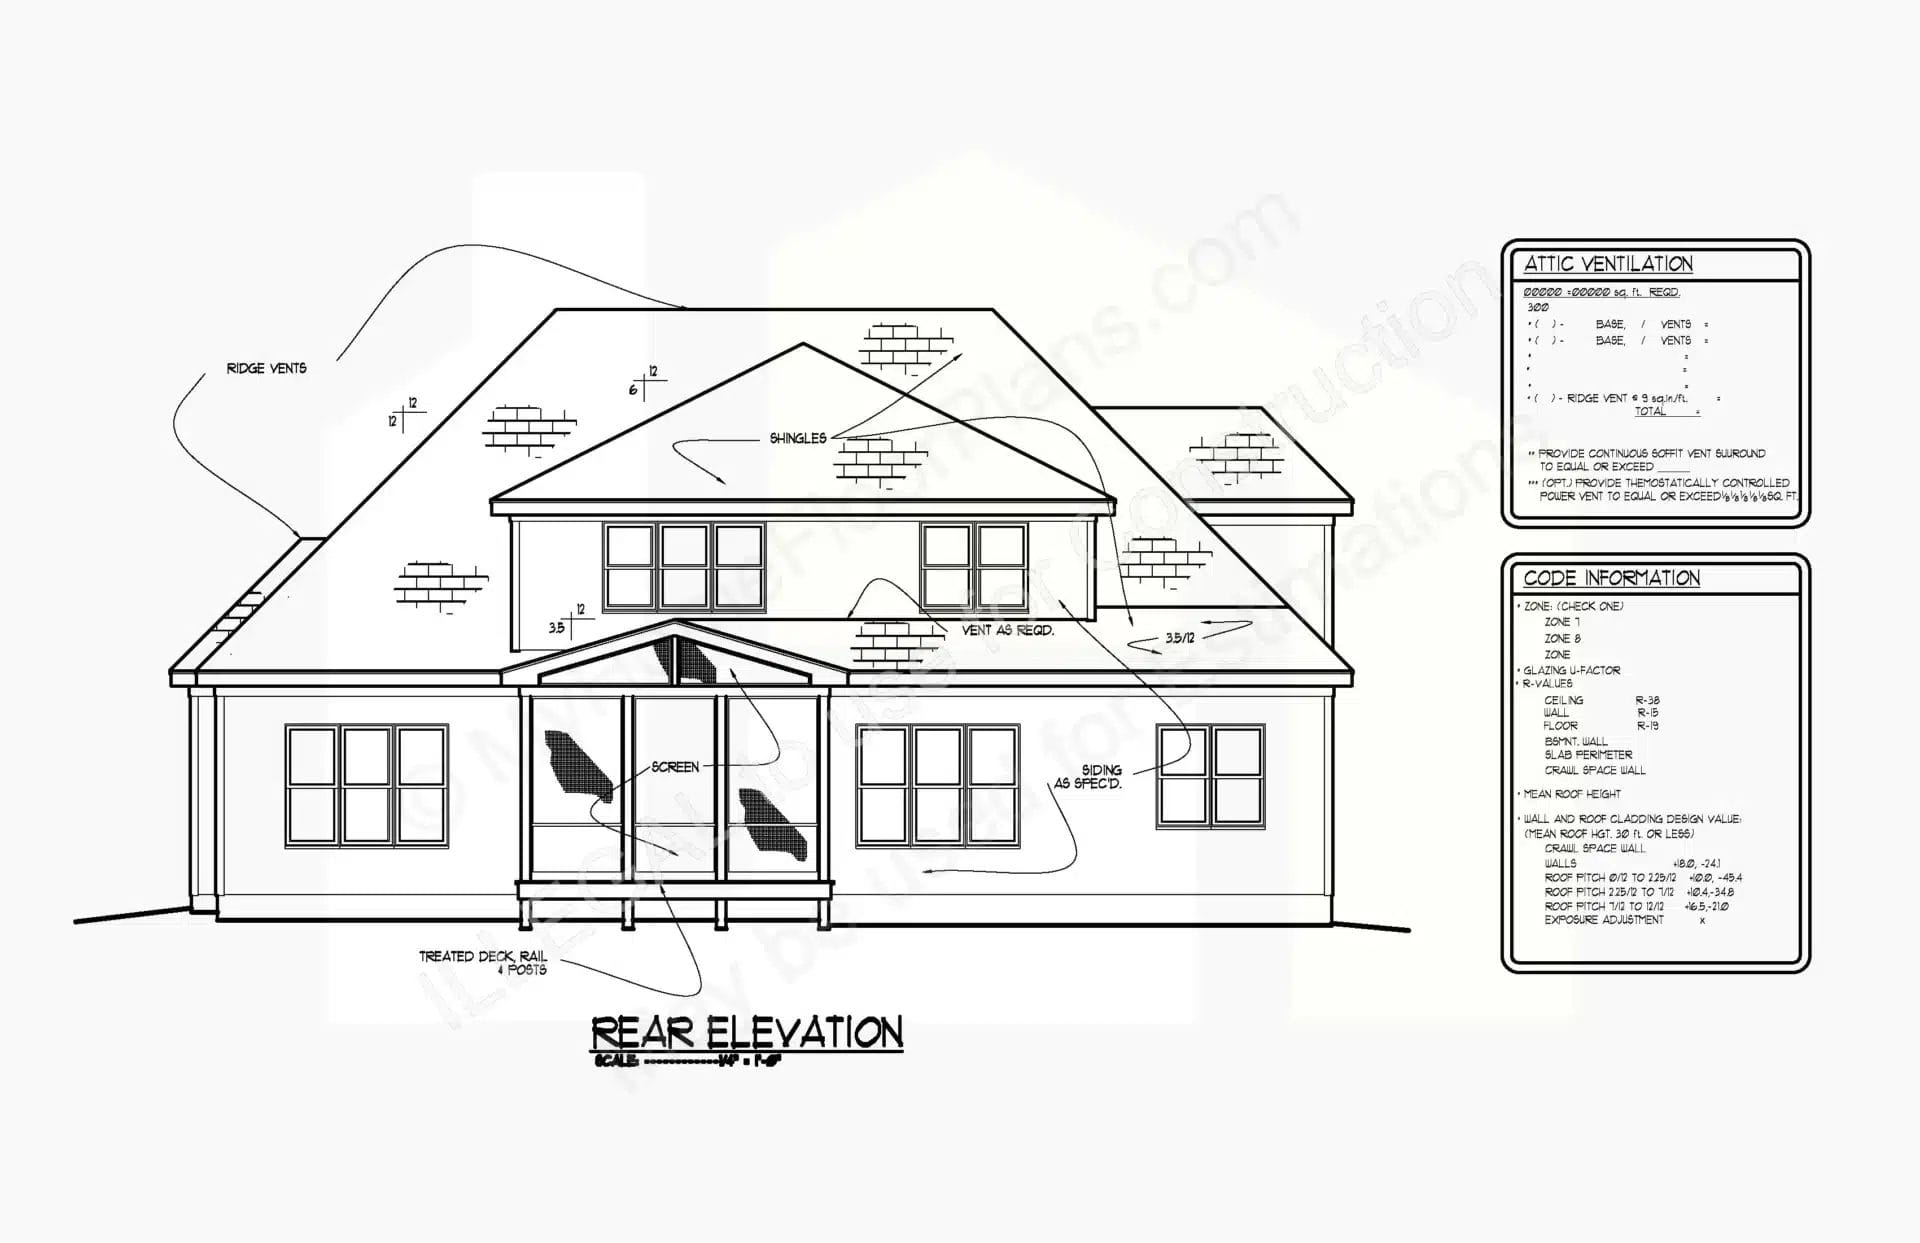 Architectural floor plan of a house's rear elevation, featuring labeled measurements and roof pitch details. Includes an attic ventilation diagram and code interpretation list with specific regulations. Black and white schematic design of product 13-1214.